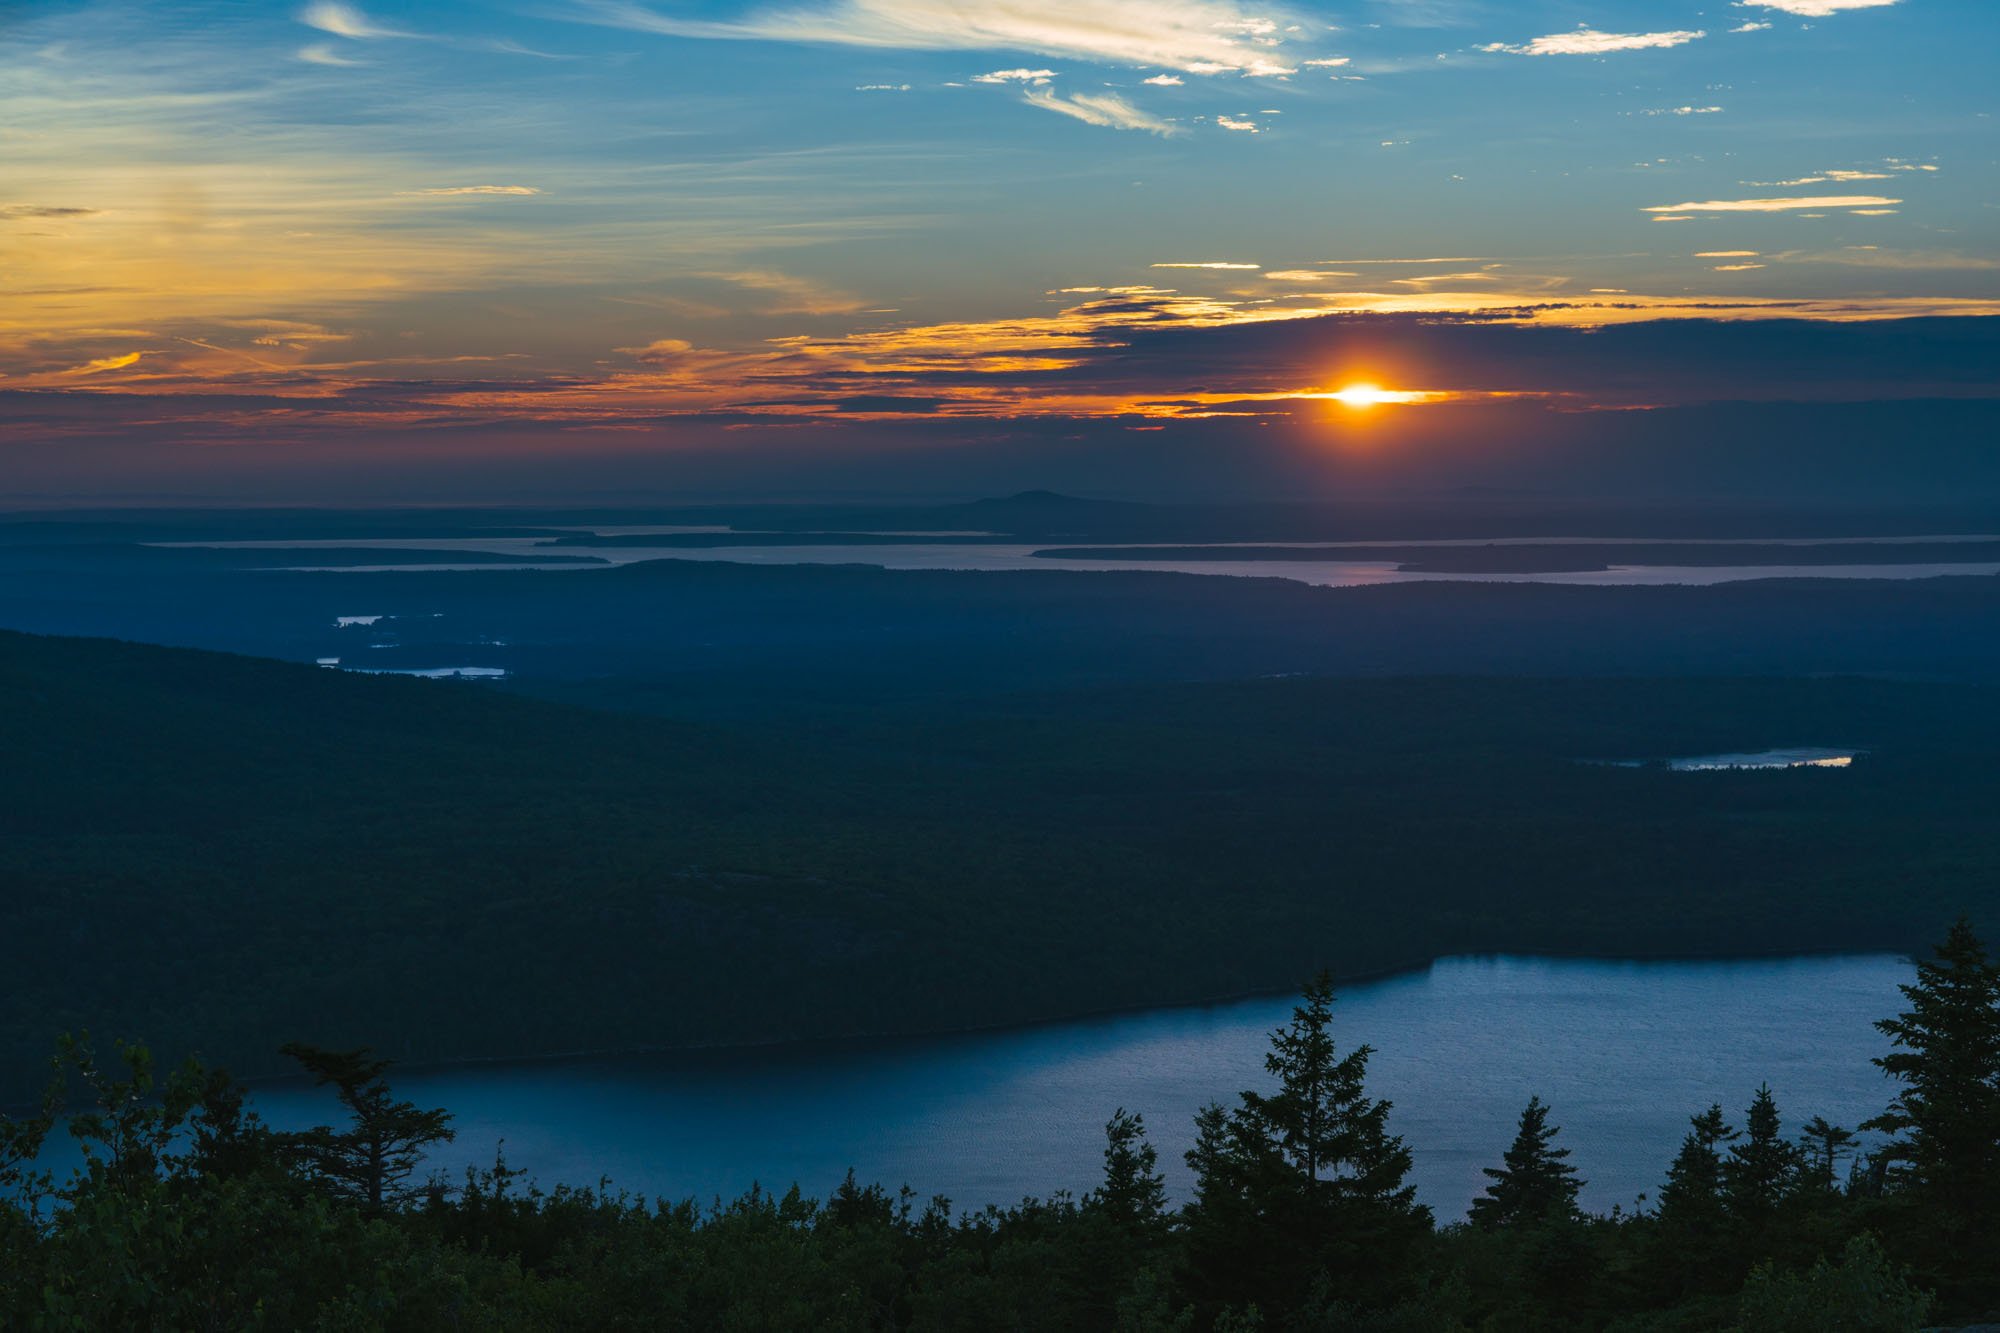  You wanted more sunset, so here is more sunset over Acadia NP 